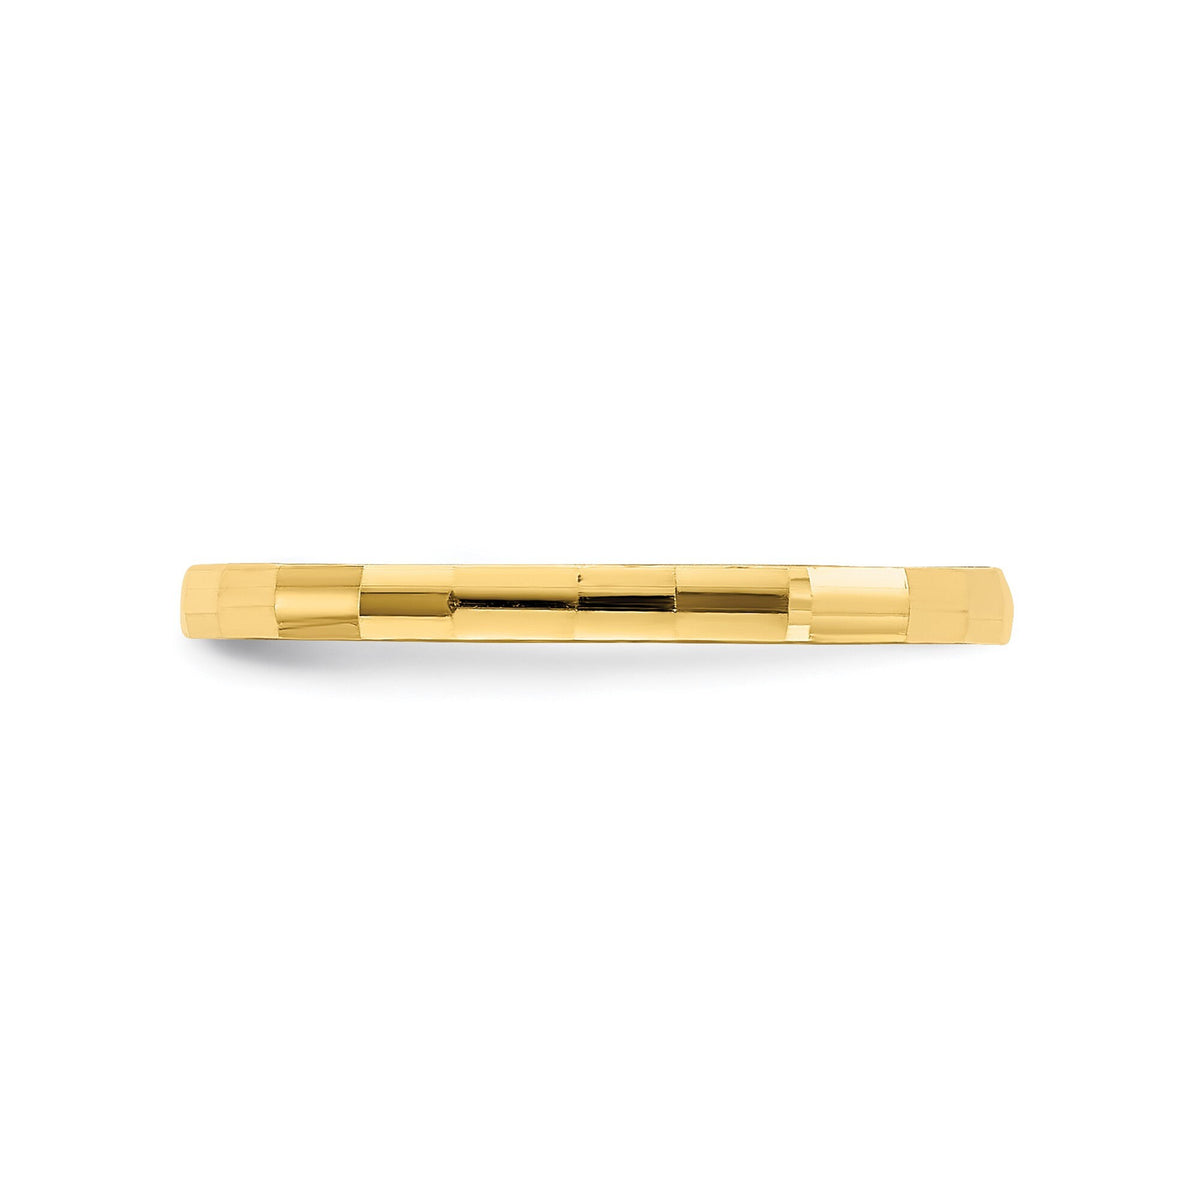 14k Yellow Gold Bamboo Texture Baby Ring / Band Size 3 Toddler Size 1.5mm Band - Gift Box Included